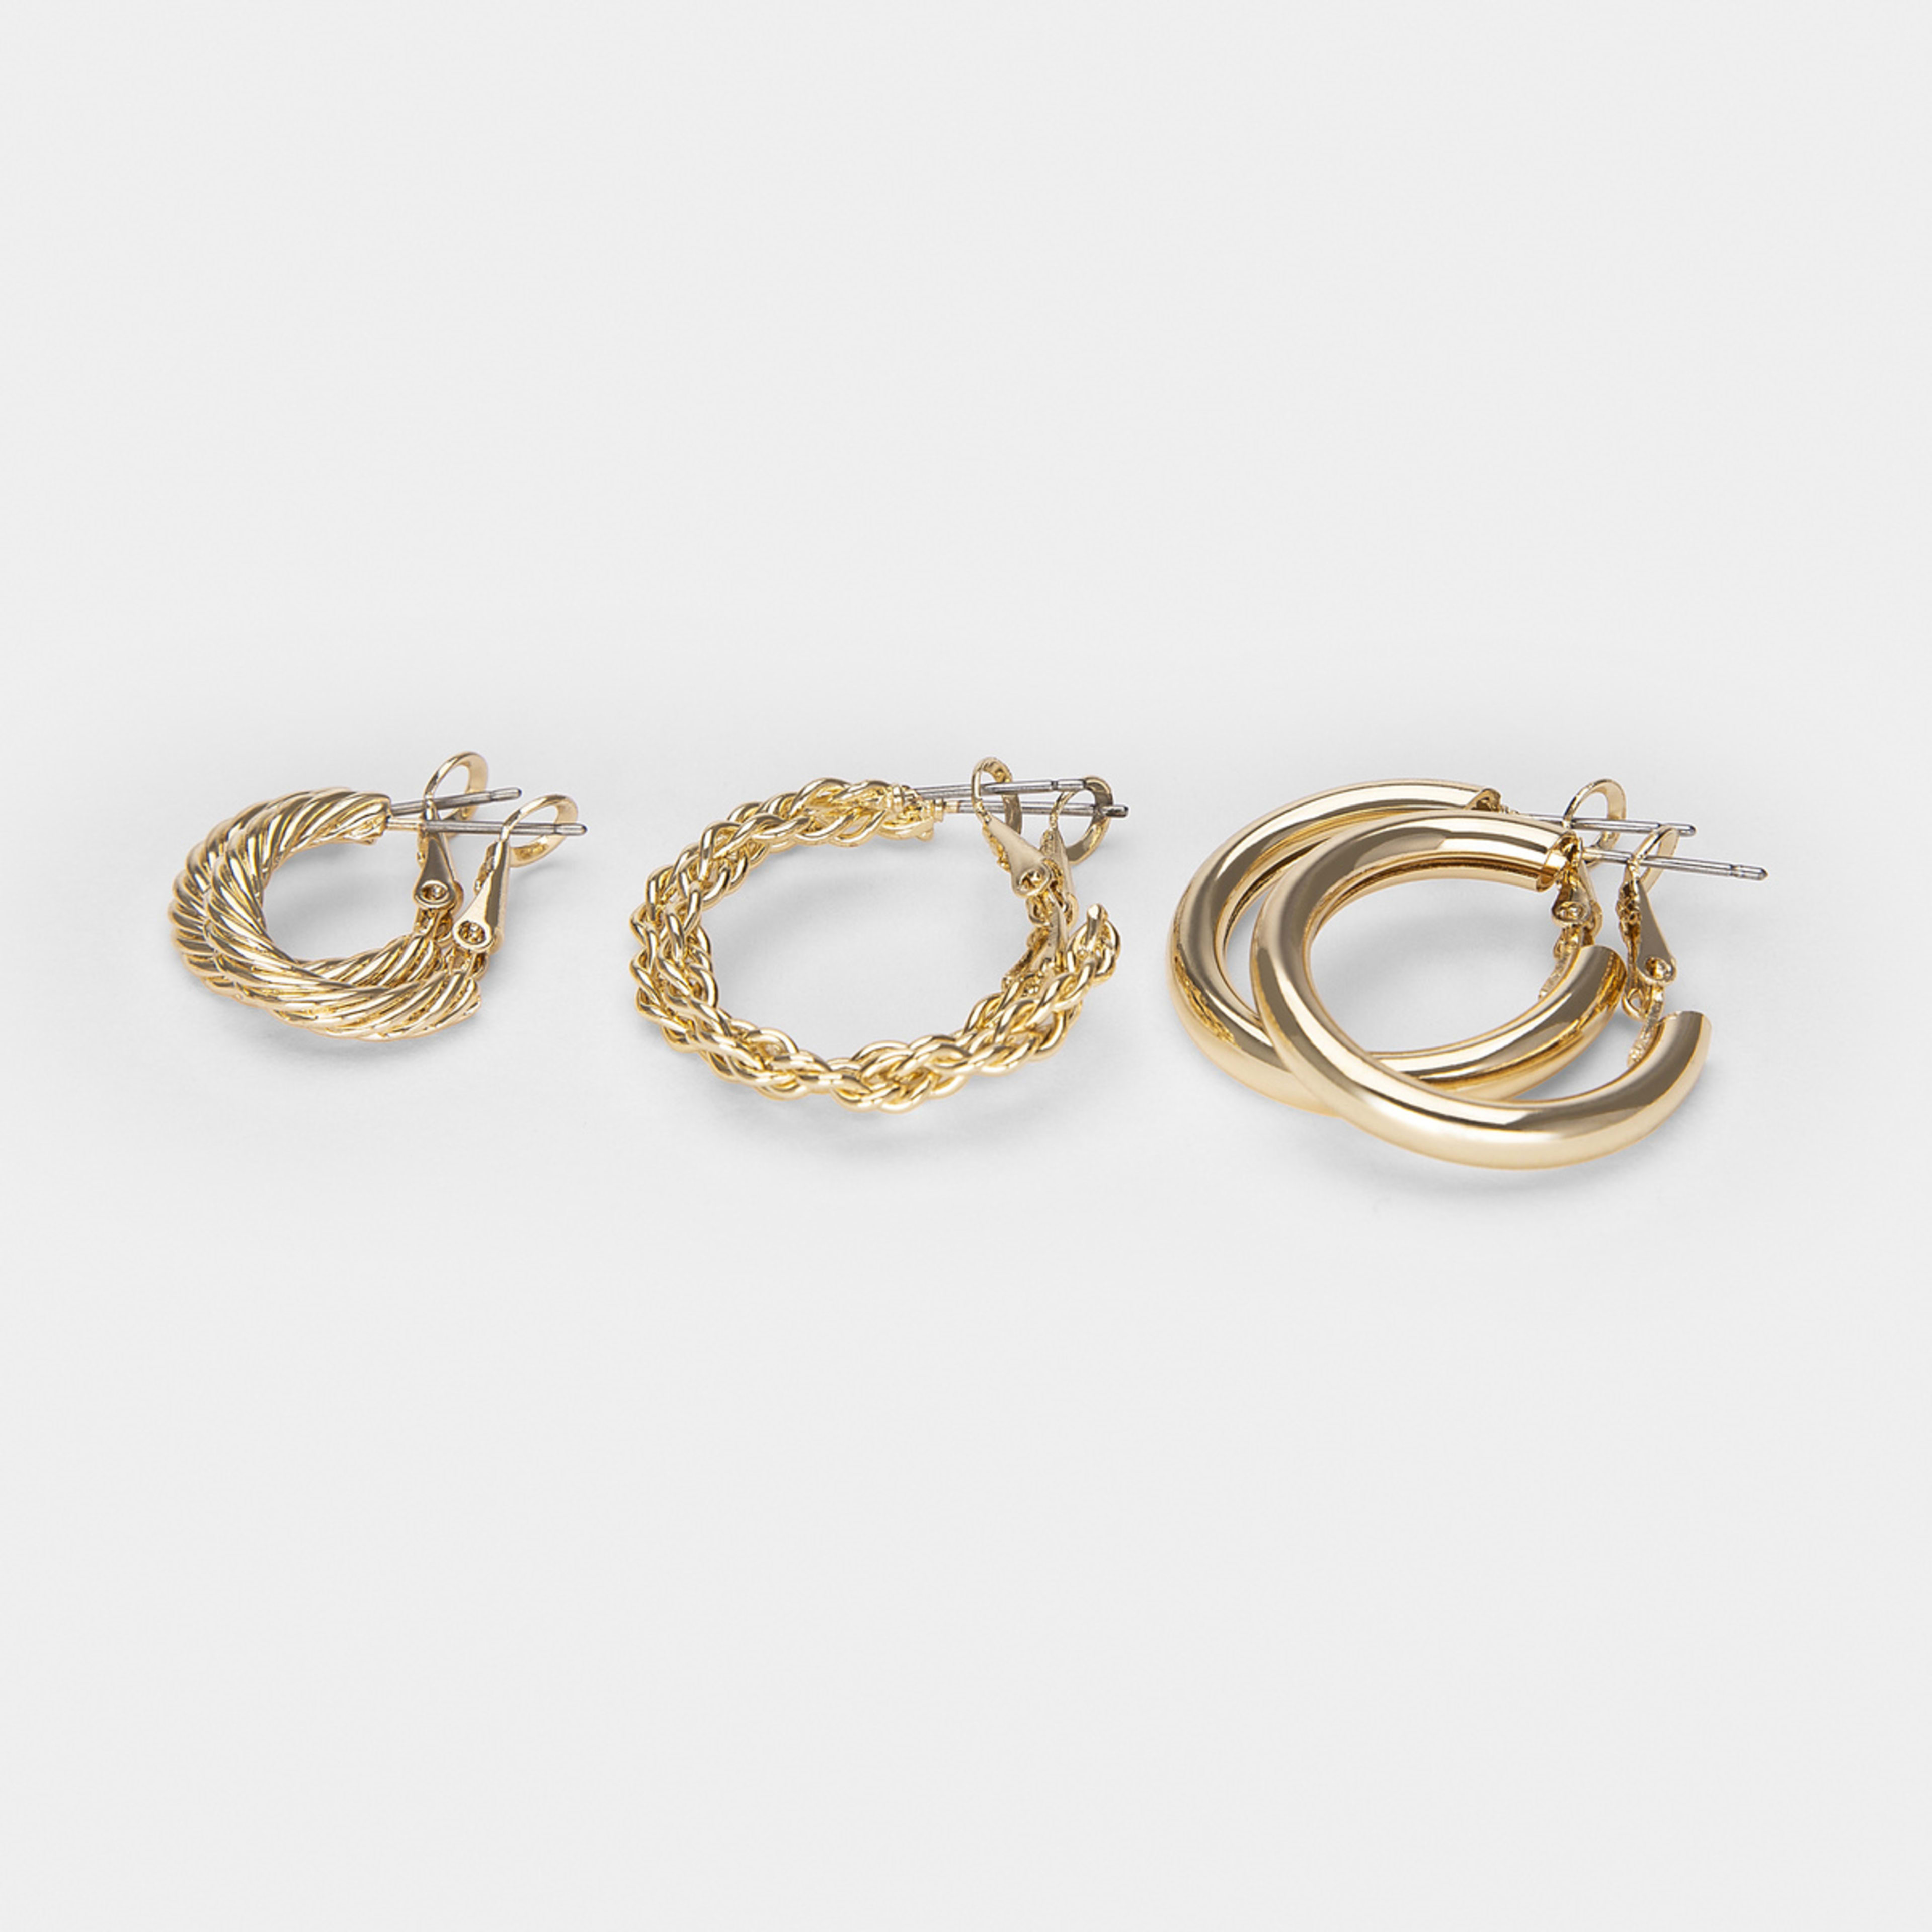 3 Pack Chain and Twisted Hoop Earrings - Gold Tone - Kmart